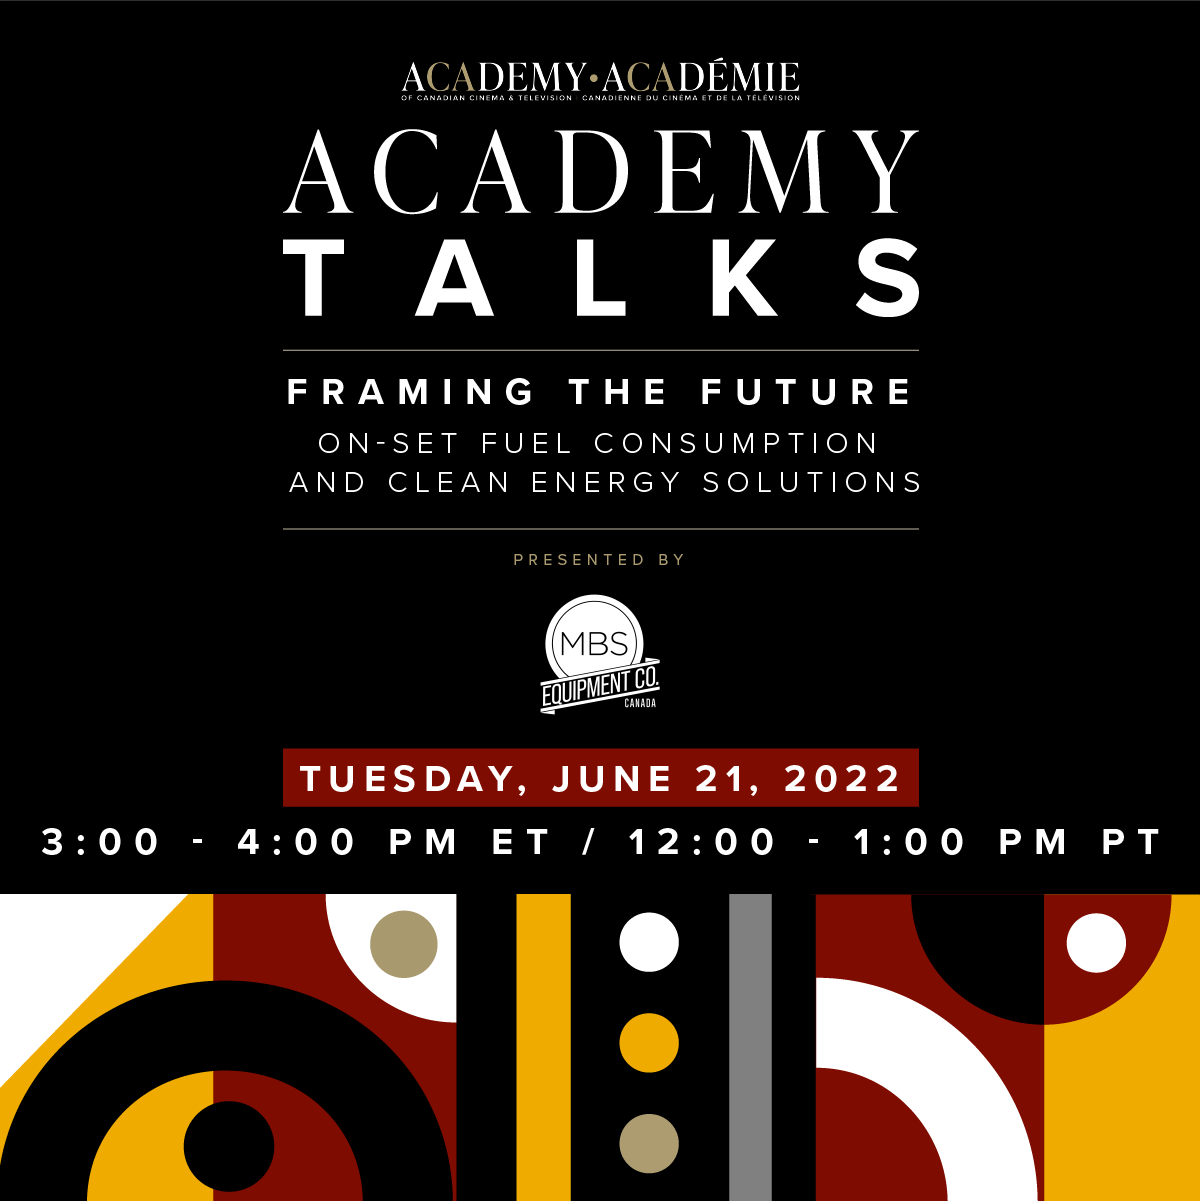 Academy Talks: Framing the Future | On-Set Fuel Consumption and Clean Energy Solutions